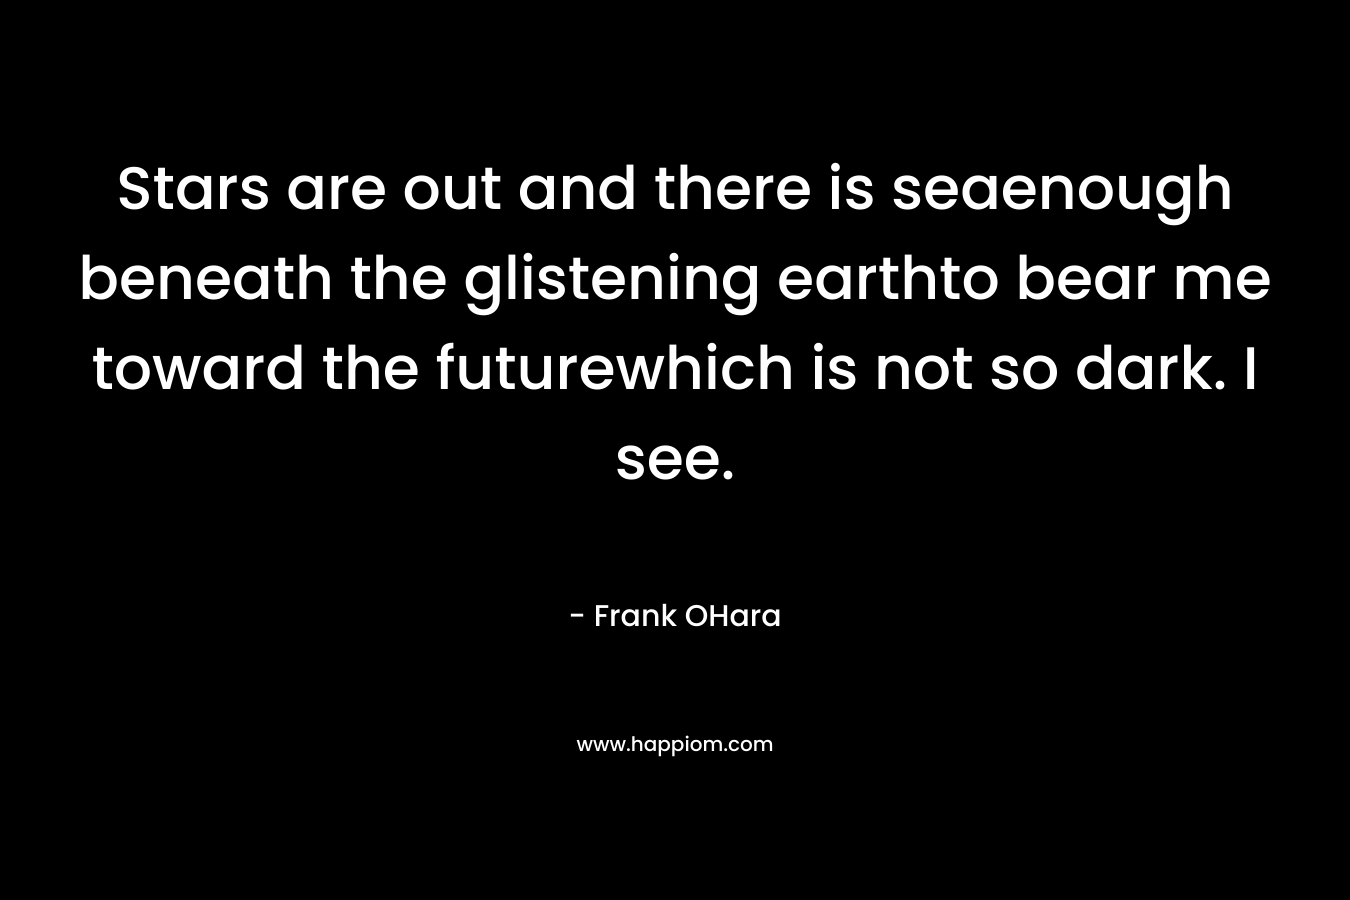 Stars are out and there is seaenough beneath the glistening earthto bear me toward the futurewhich is not so dark. I see. – Frank OHara